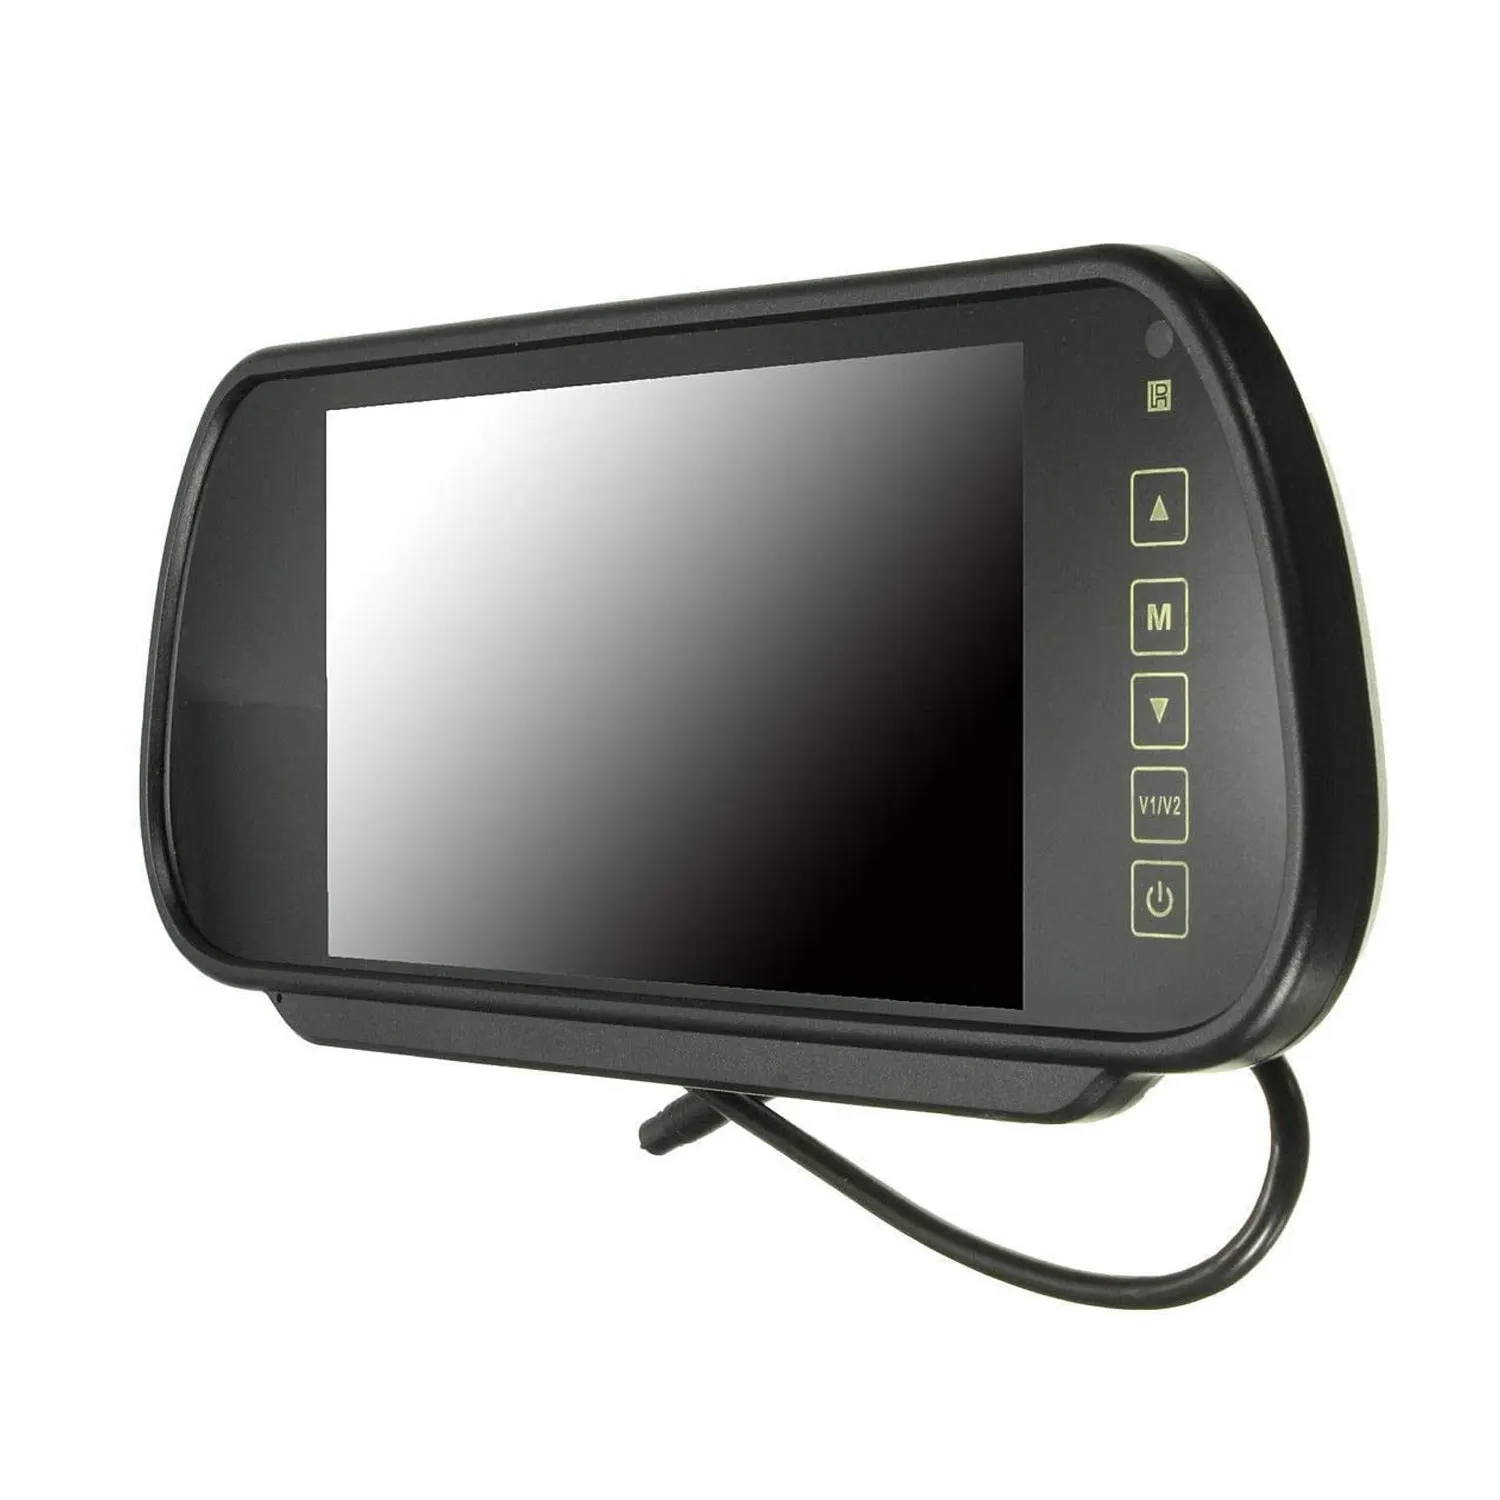 7" TFT Color LCD Screen 2 Video Input Car Rear View Mirror Monitor Vehicle Parking in-Mirror Monitor for DVD/VCR/Car Reverse Cam